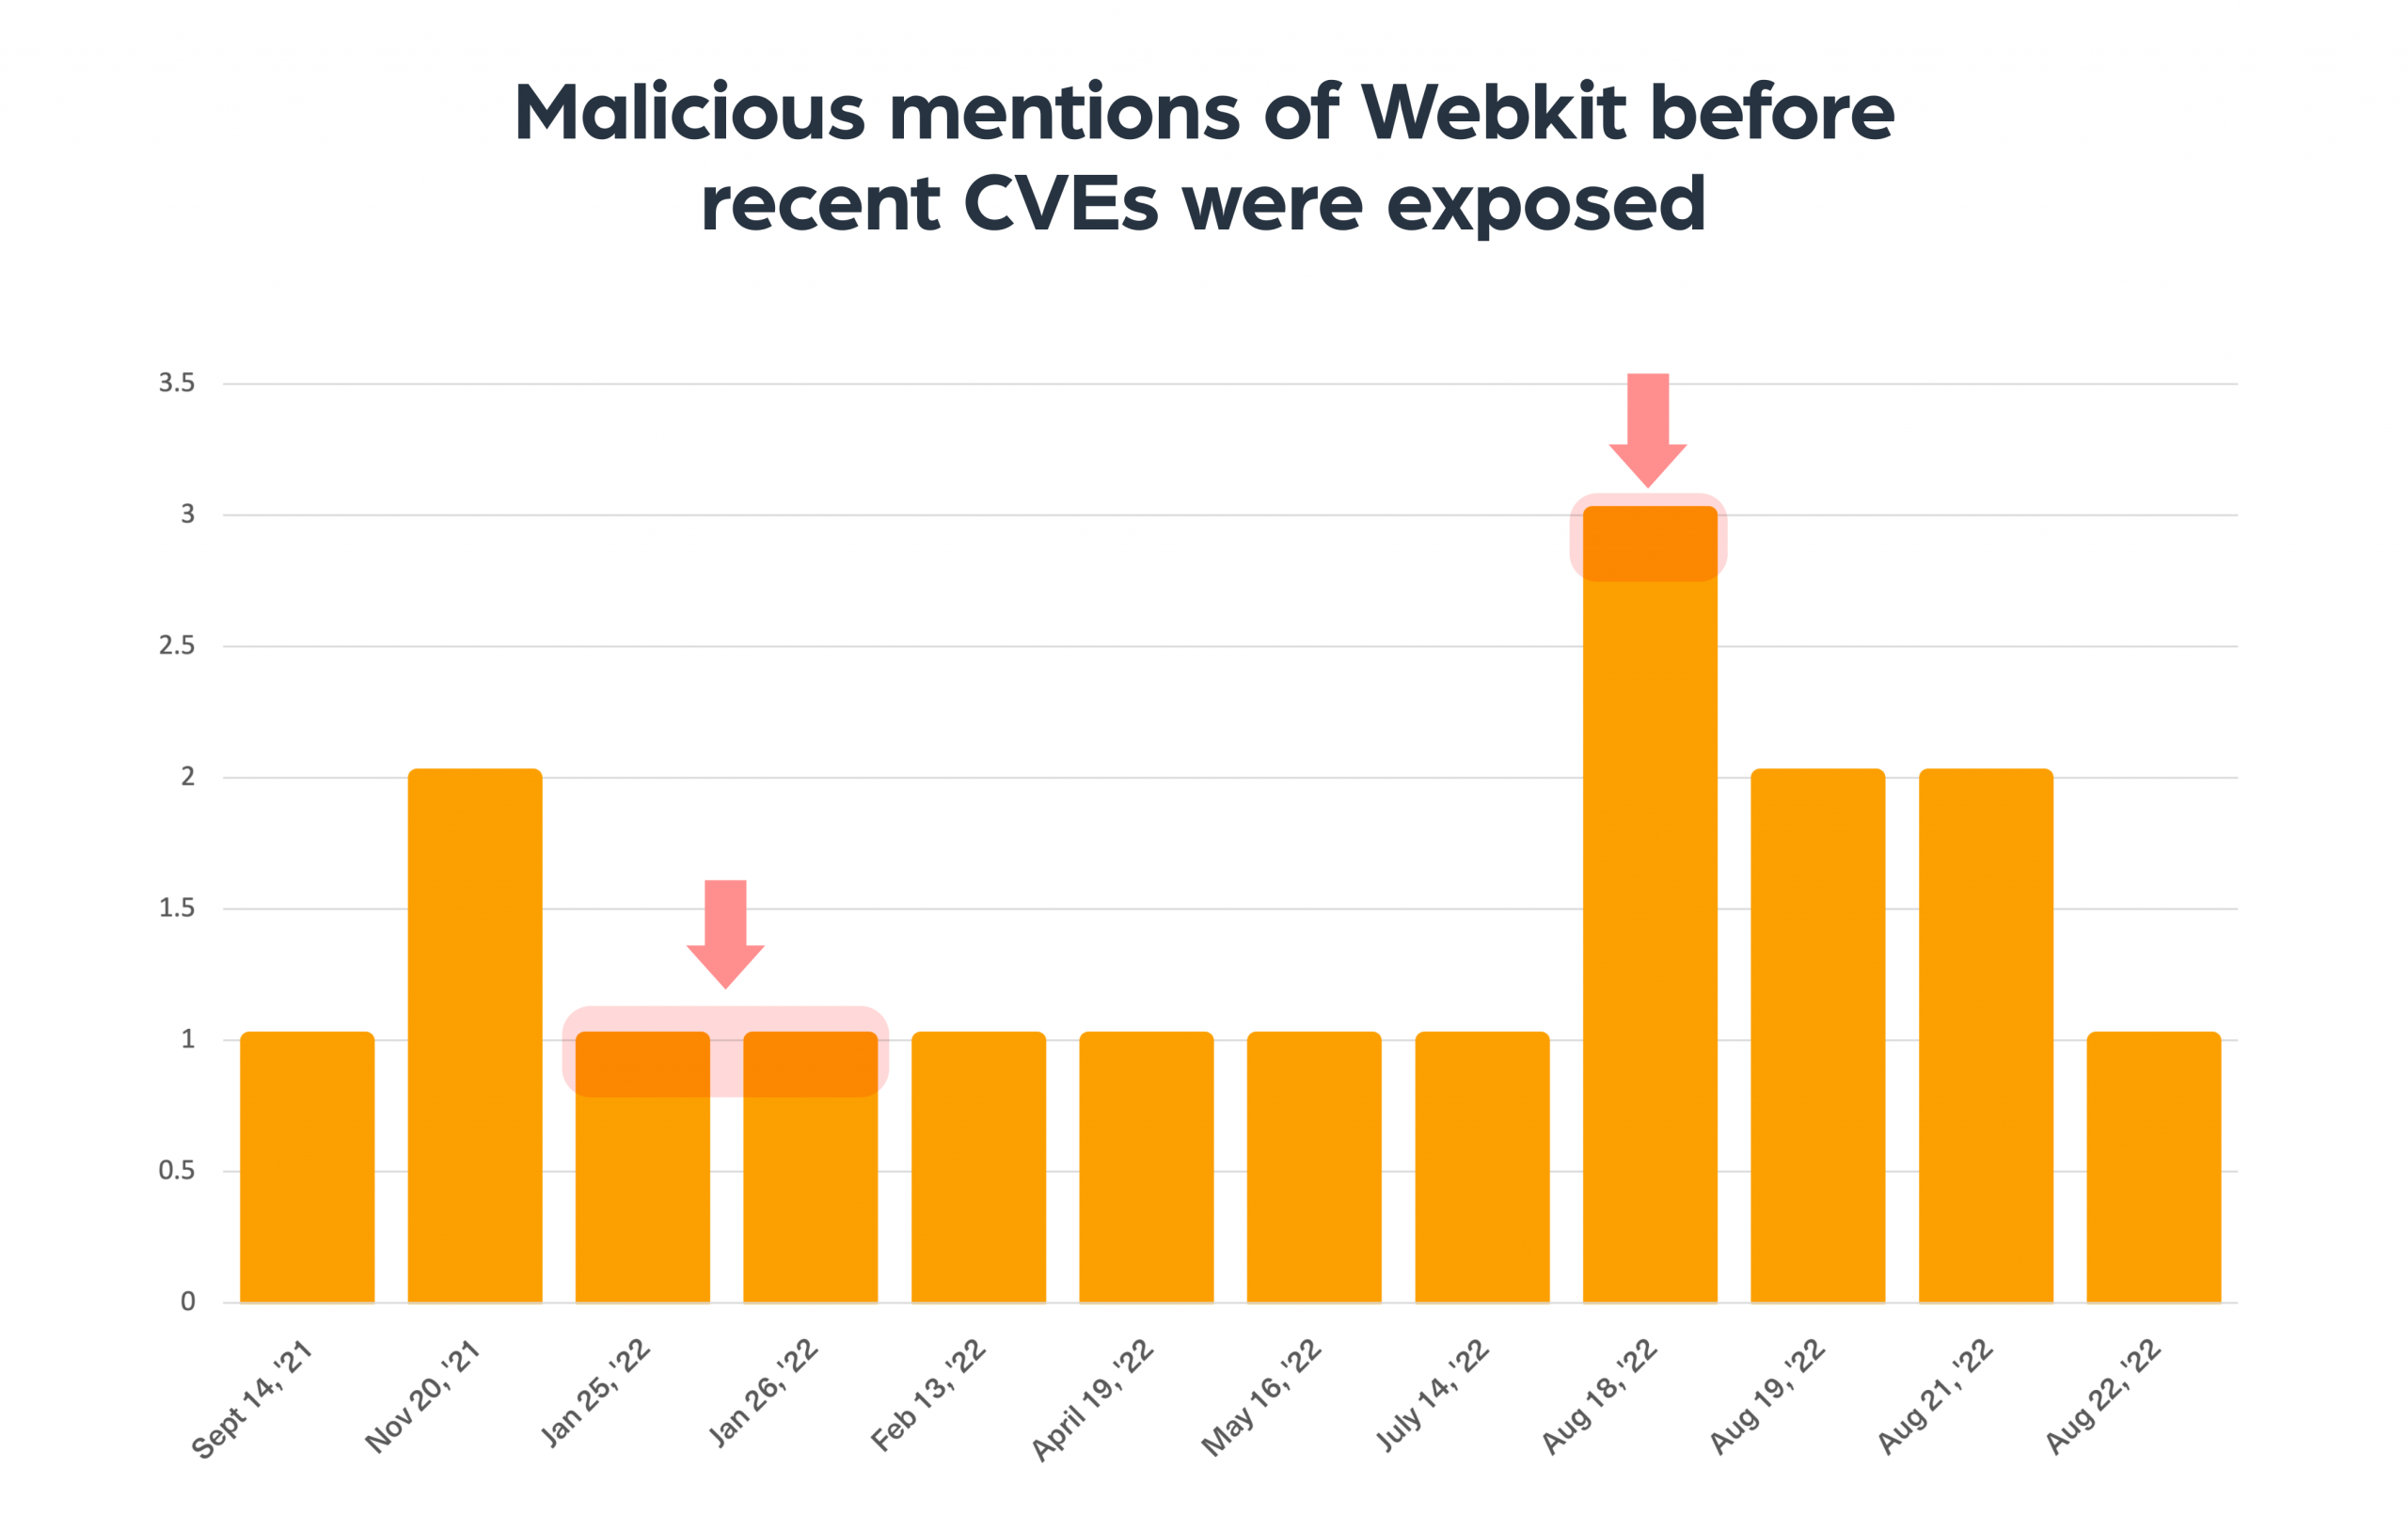 Malicious mentions of Webkit before recent CVEs were exposed